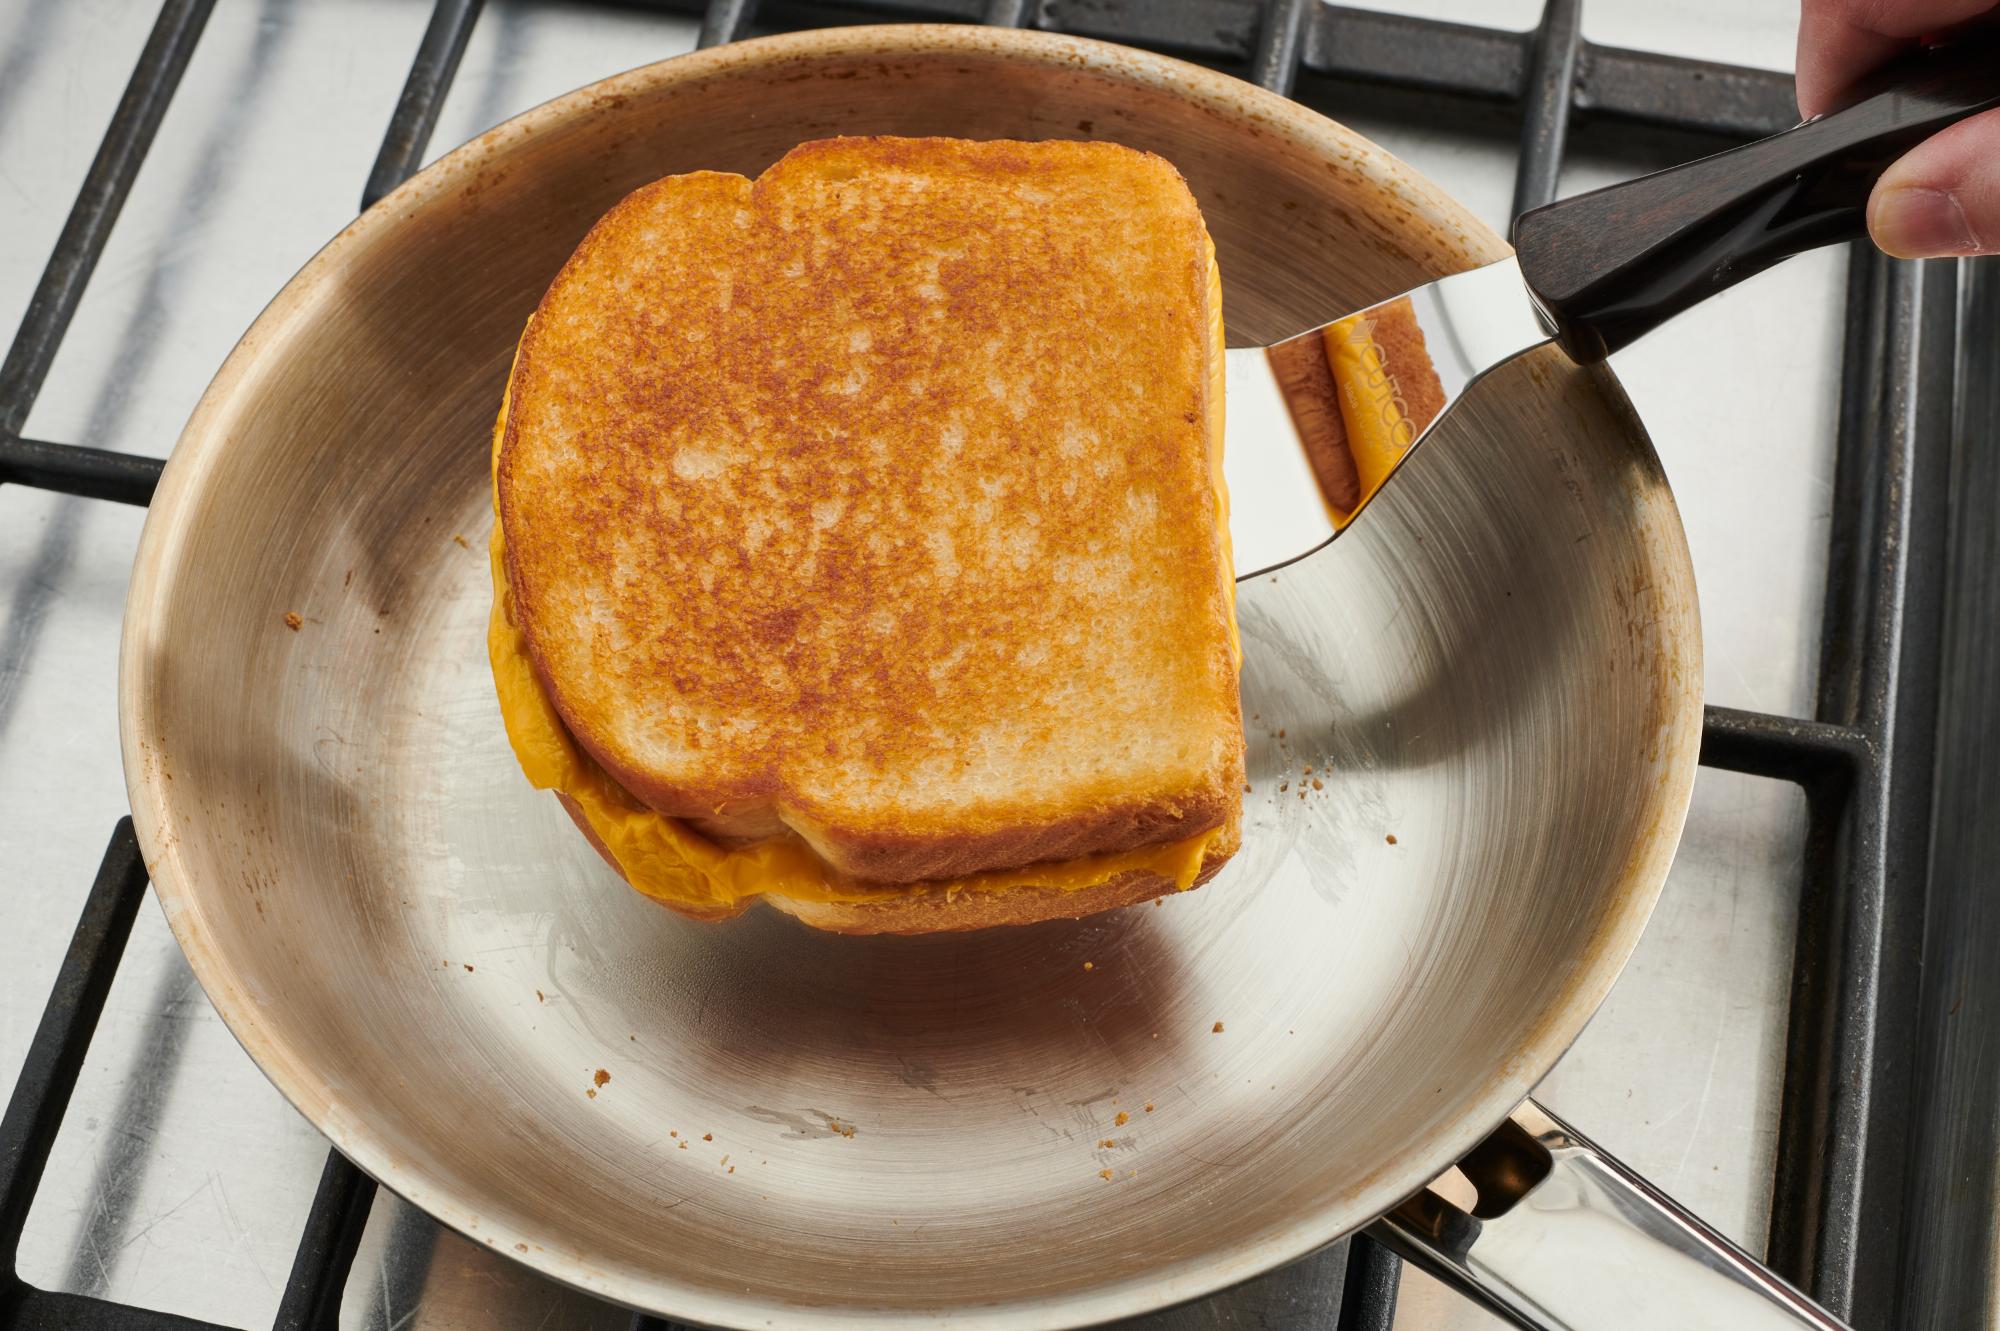 Flipping a grilled cheese with a Turn n' Serve.